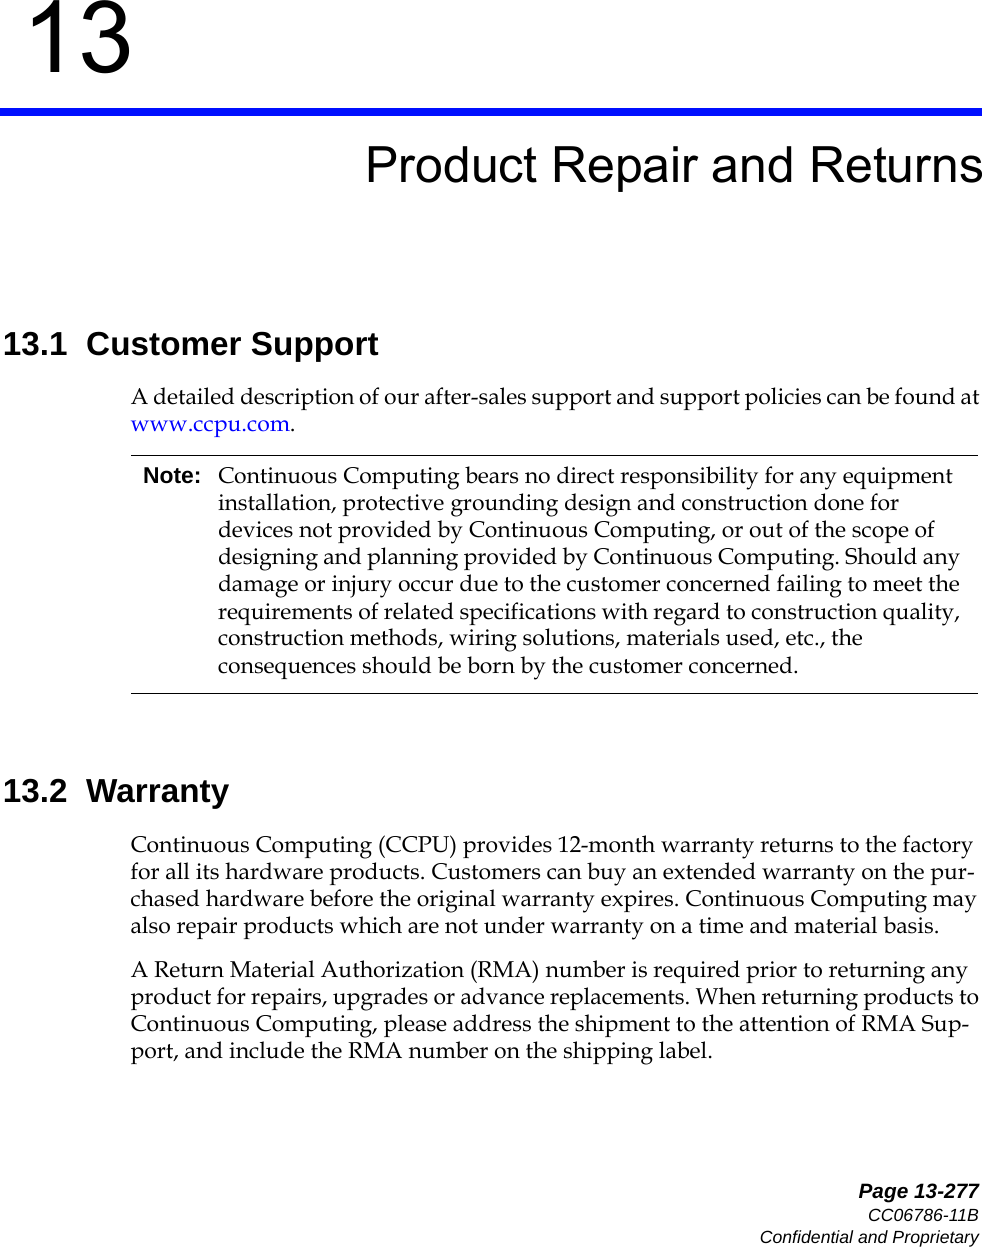   Page 13-277CC06786-11BConfidential and Proprietary13Preliminary13Product Repair and Returns13.1  Customer SupportA detailed description of our after-sales support and support policies can be found at www.ccpu.com.13.2  WarrantyContinuous Computing (CCPU) provides 12-month warranty returns to the factory for all its hardware products. Customers can buy an extended warranty on the pur-chased hardware before the original warranty expires. Continuous Computing may also repair products which are not under warranty on a time and material basis.A Return Material Authorization (RMA) number is required prior to returning any product for repairs, upgrades or advance replacements. When returning products to Continuous Computing, please address the shipment to the attention of RMA Sup-port, and include the RMA number on the shipping label.Note: Continuous Computing bears no direct responsibility for any equipment installation, protective grounding design and construction done for devices not provided by Continuous Computing, or out of the scope of designing and planning provided by Continuous Computing. Should any damage or injury occur due to the customer concerned failing to meet the requirements of related specifications with regard to construction quality, construction methods, wiring solutions, materials used, etc., the consequences should be born by the customer concerned.